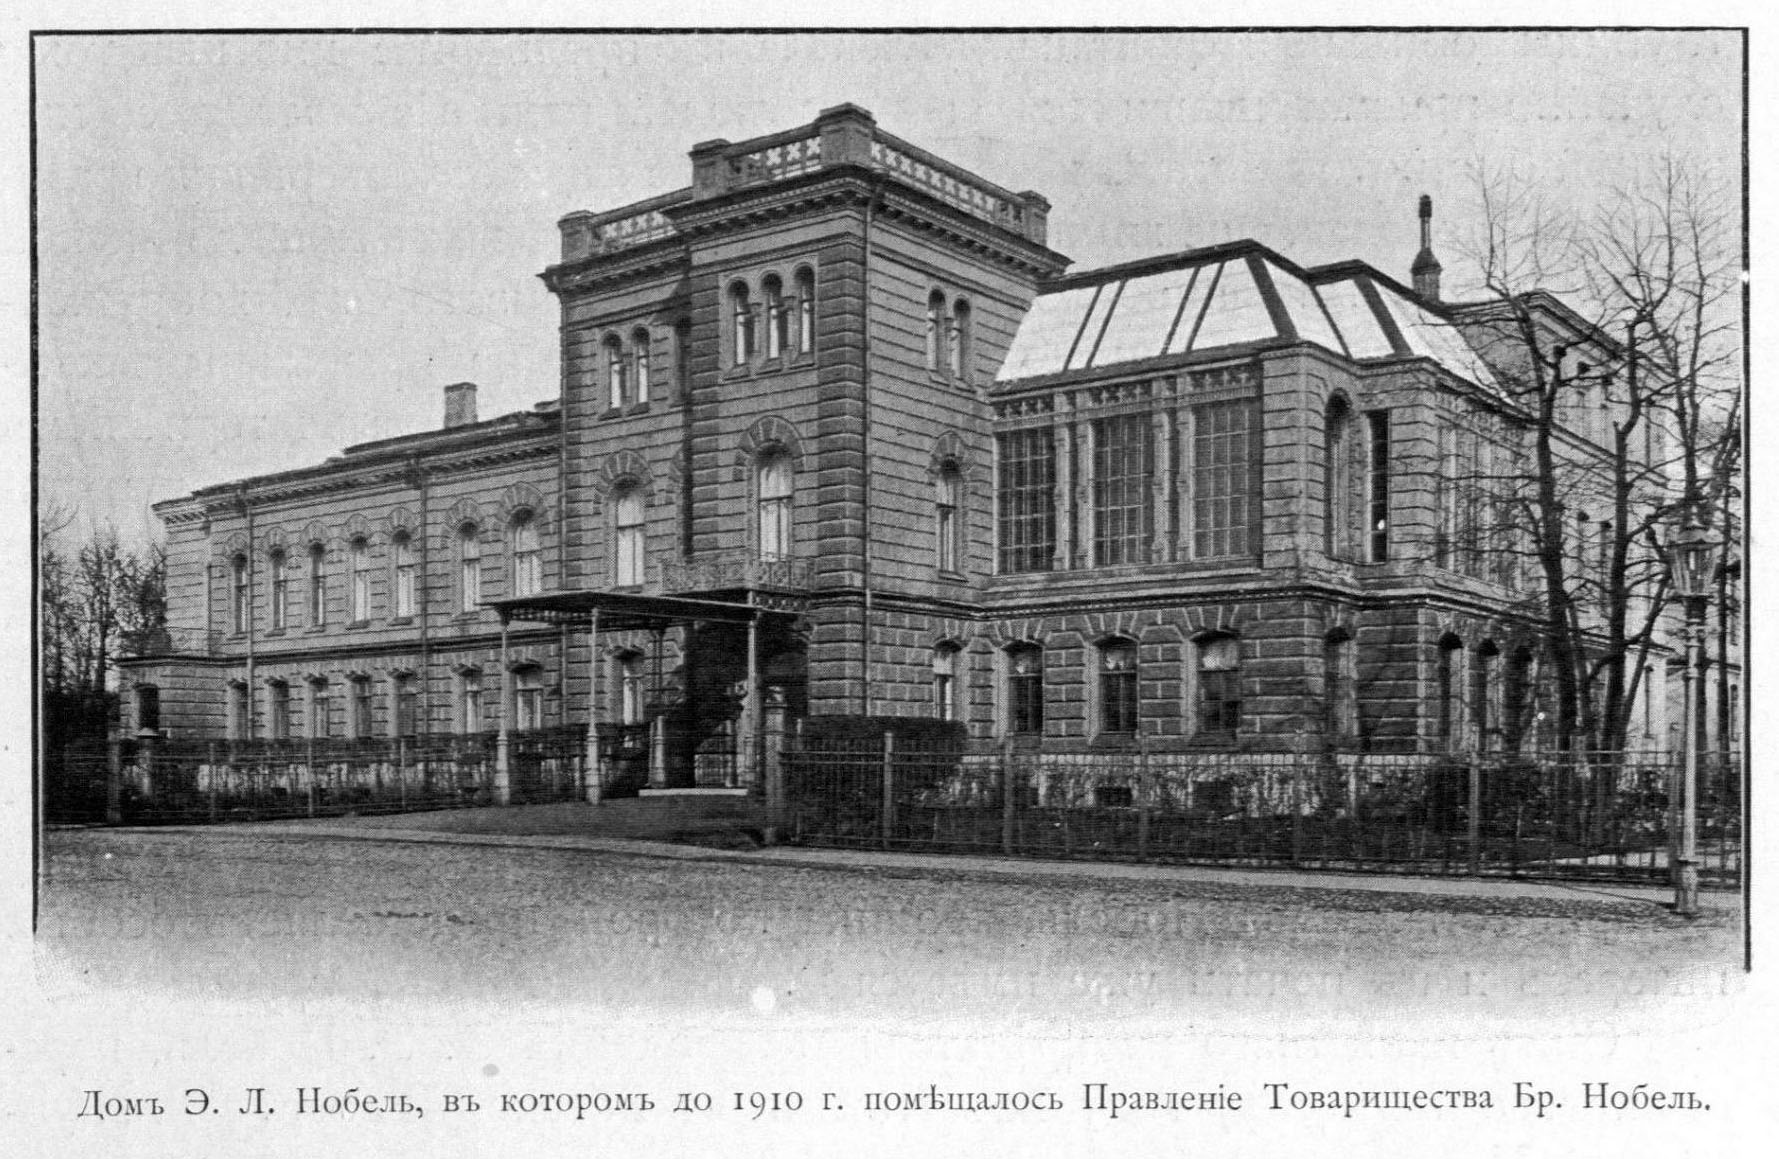 Branobel, Main office in St. Petersburg until 1910. In this house until 1910 the Central administration office in St. Petersburg was located.